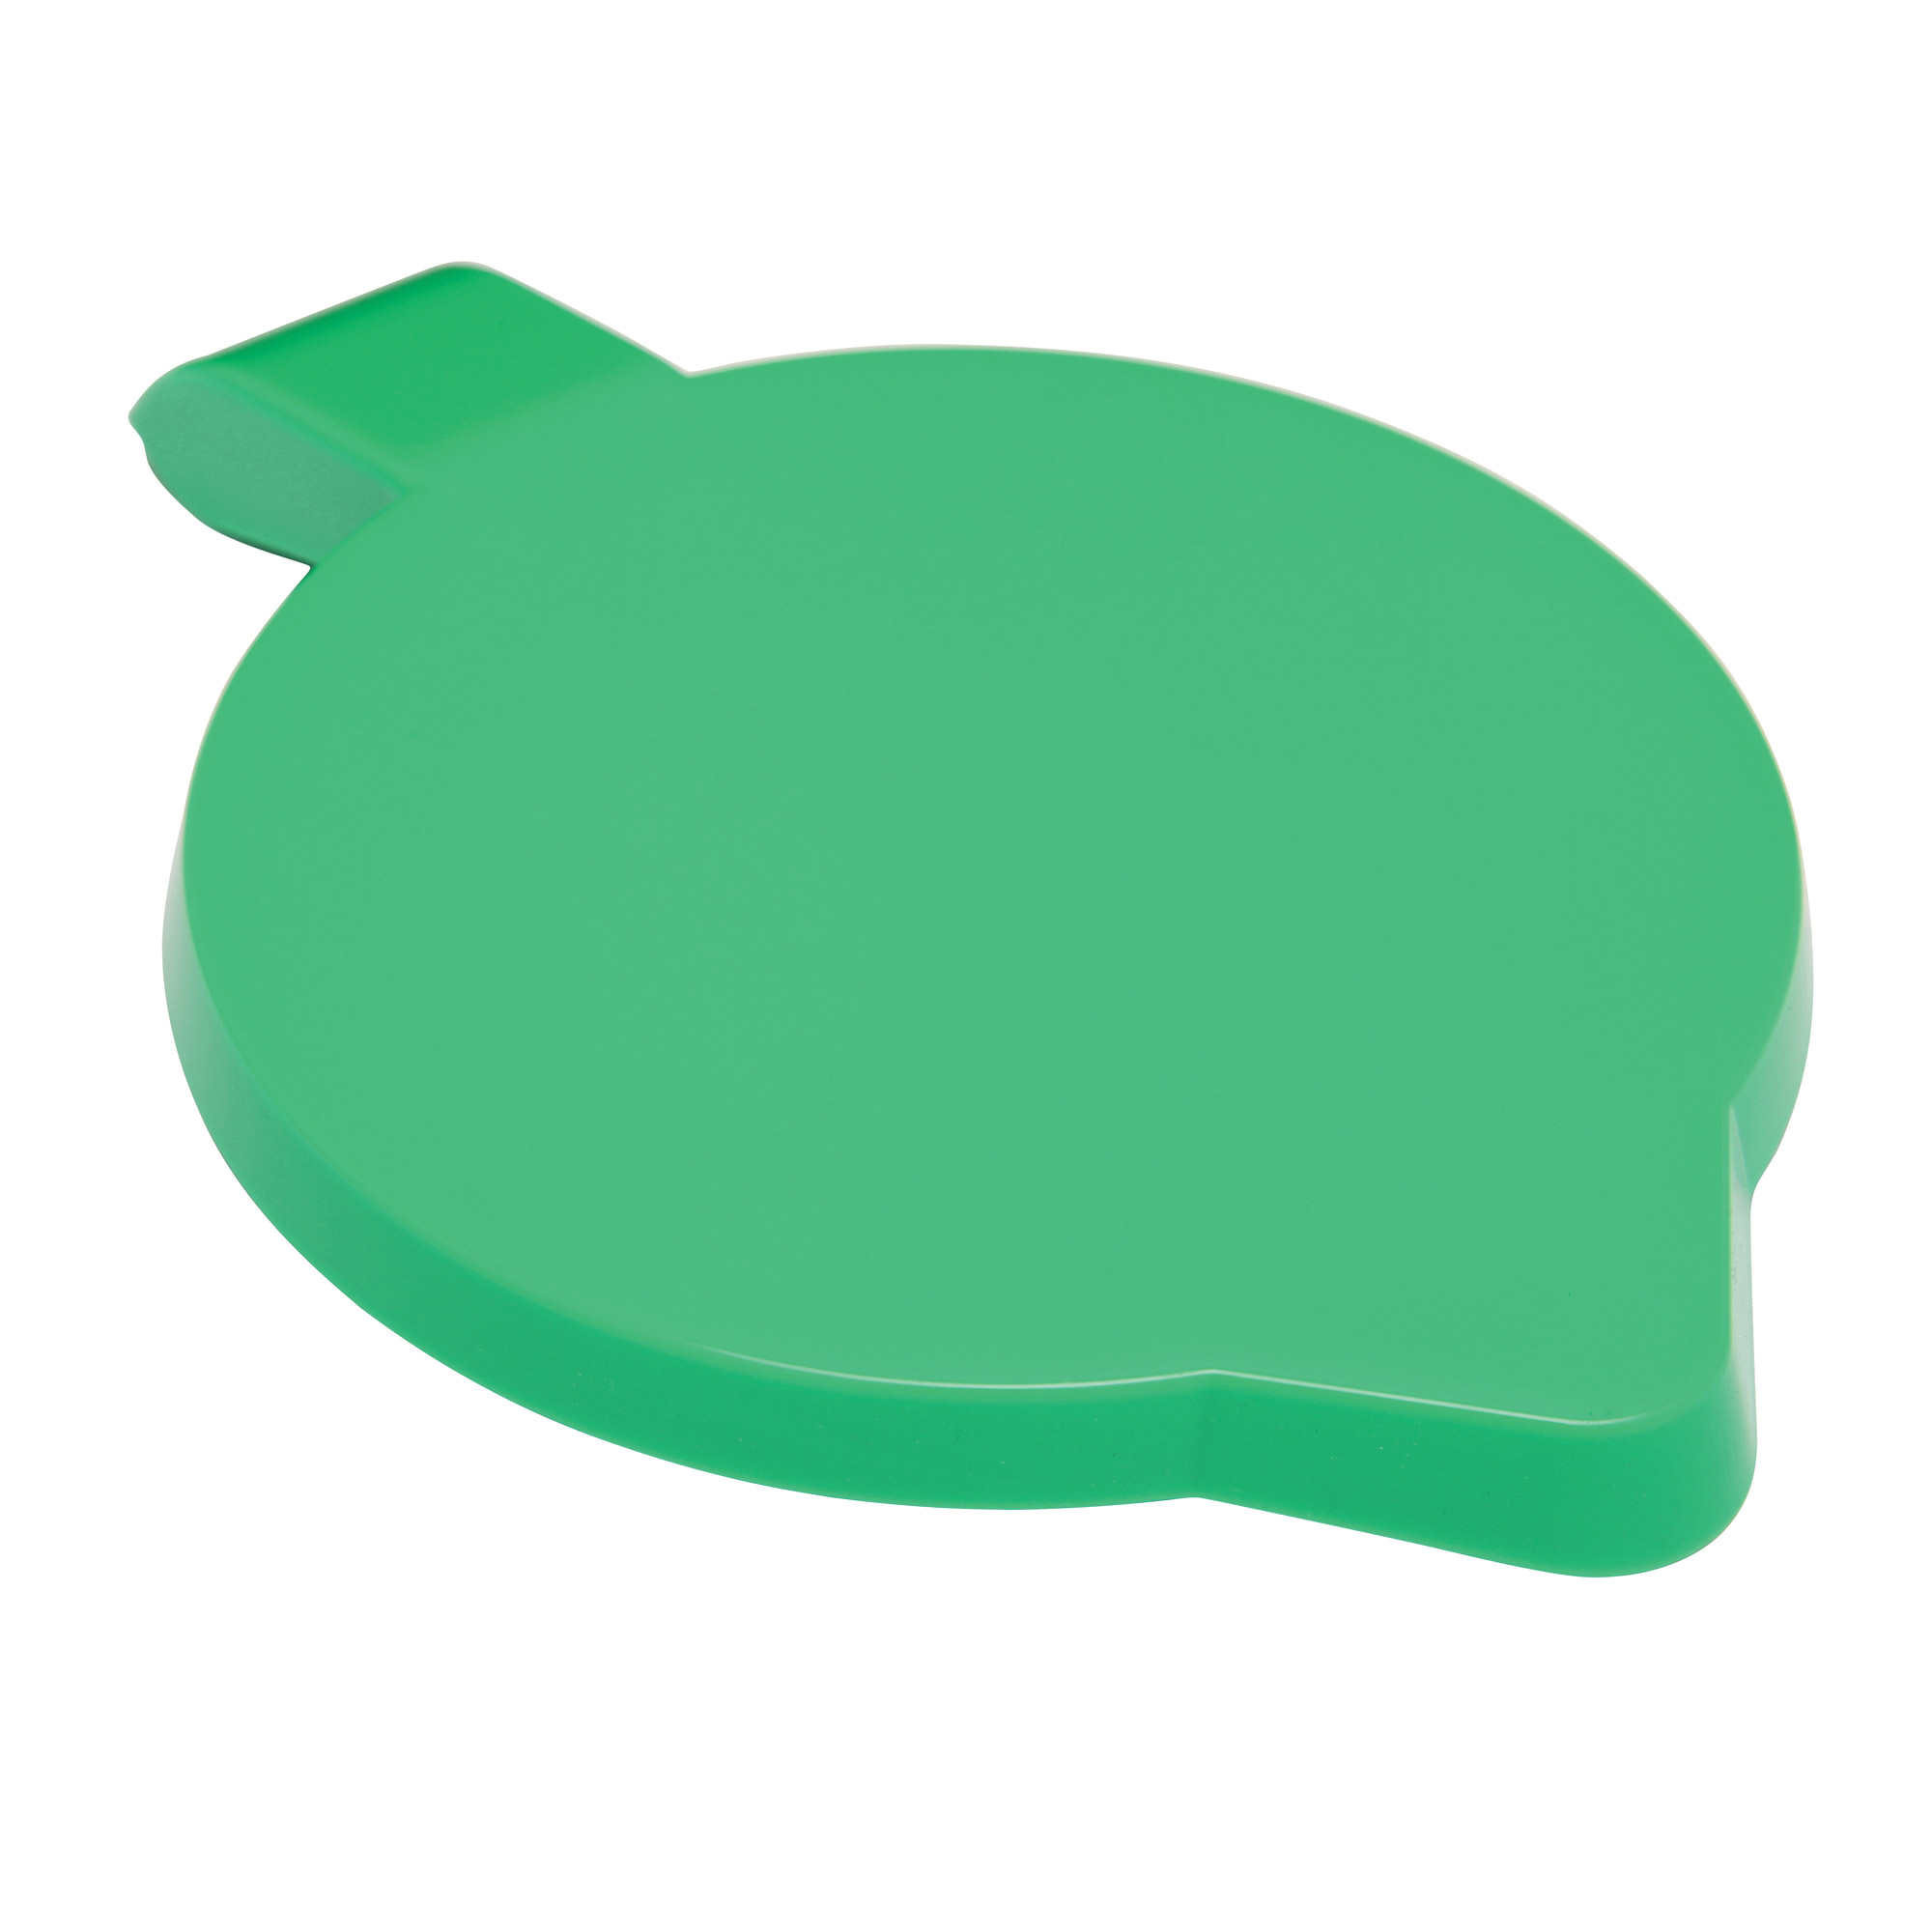 Polycarbonate Lid For Cb-8106 Apple Green - Each